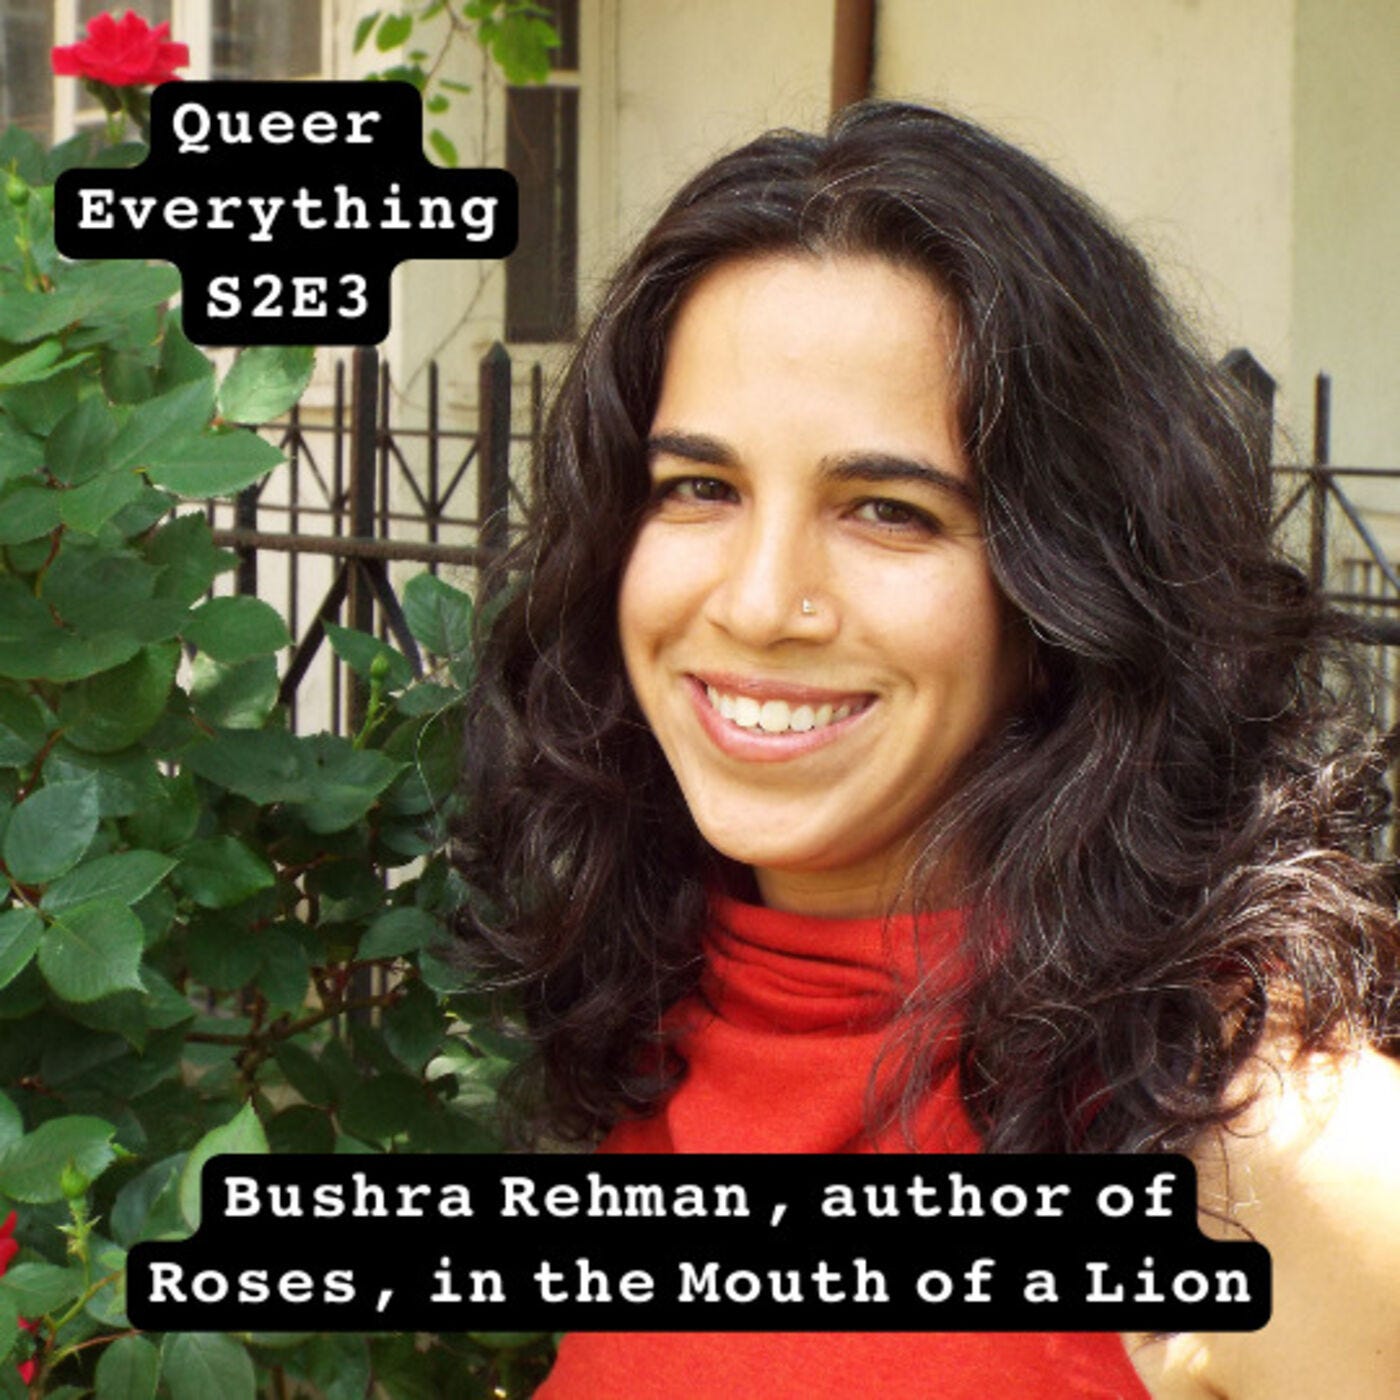 Bushra Rehman, author of Roses, in the Mouth of a Lion